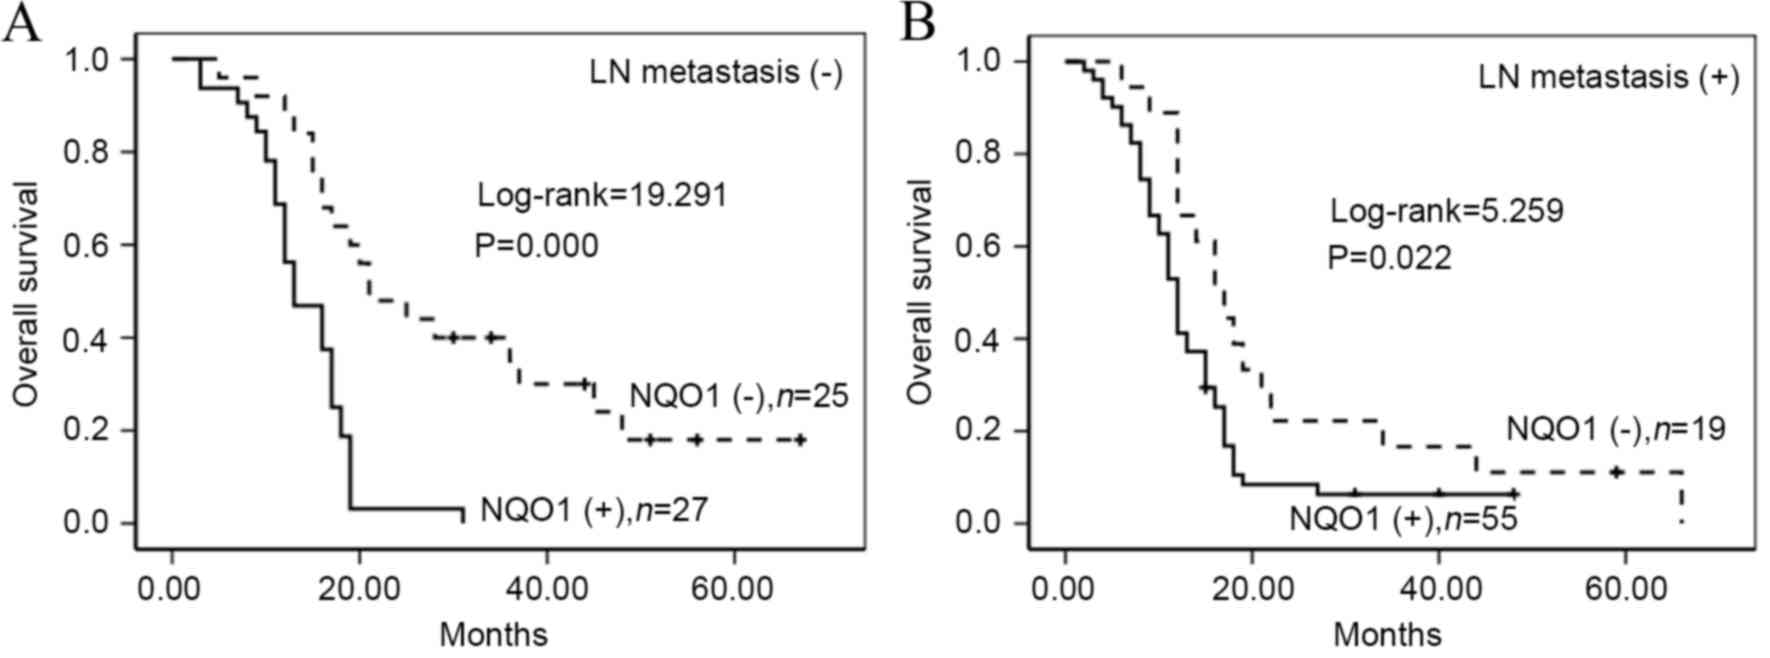 Clinicopathological Implications Of Nqo1 Overexpression In The Prognosis Of Pancreatic Adenocarcinoma